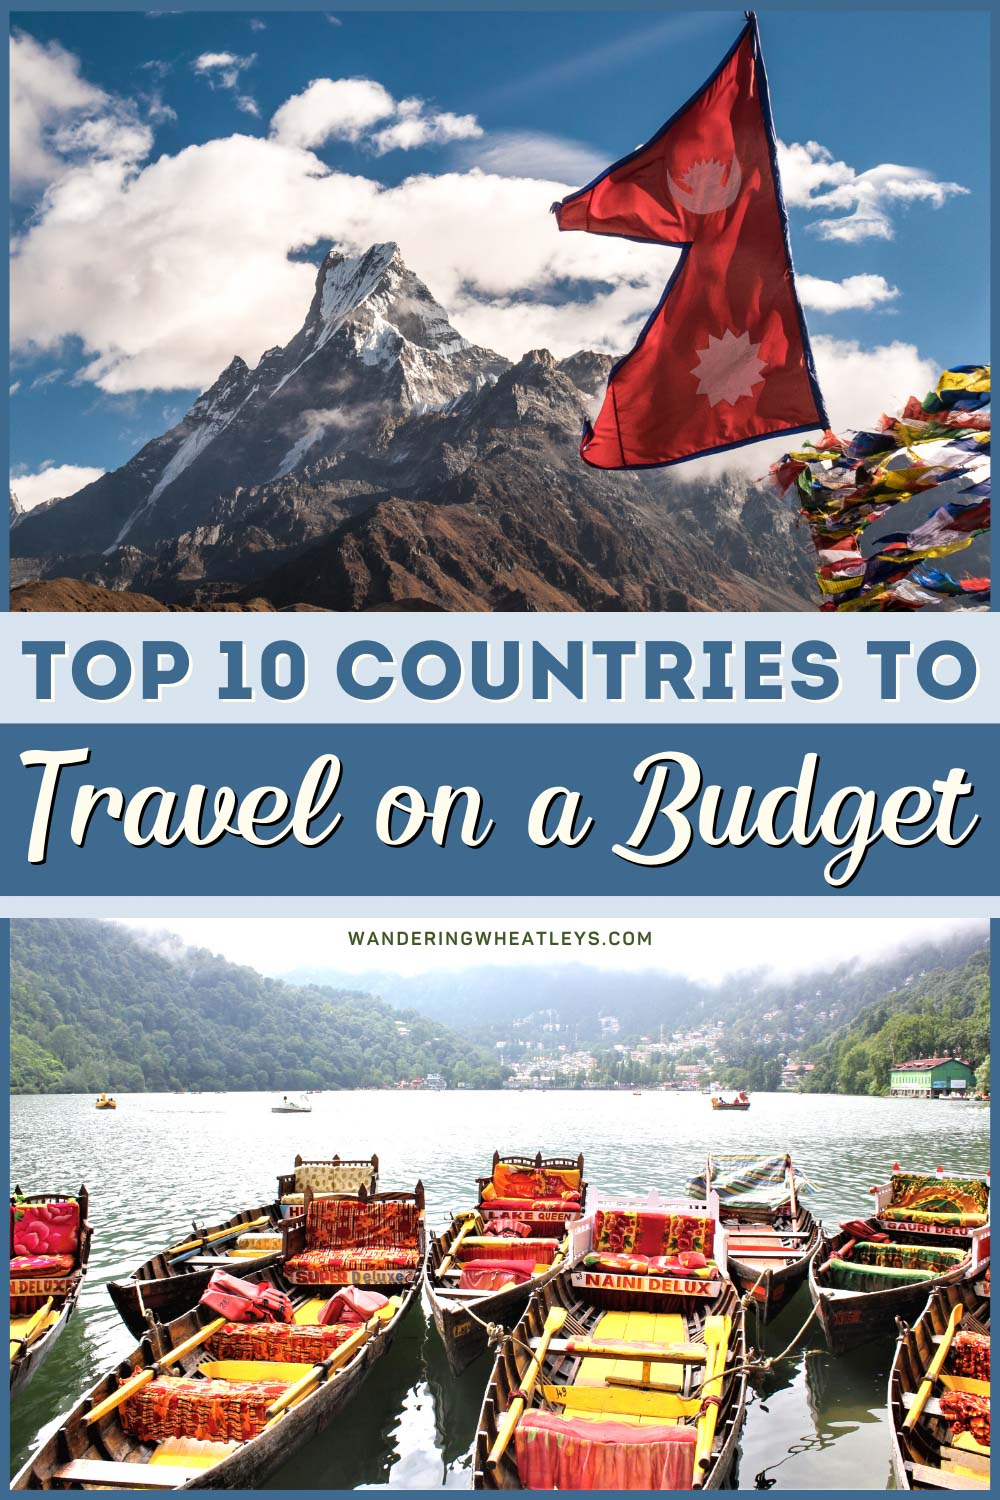 Top 10 budget travel ideas and inspiration